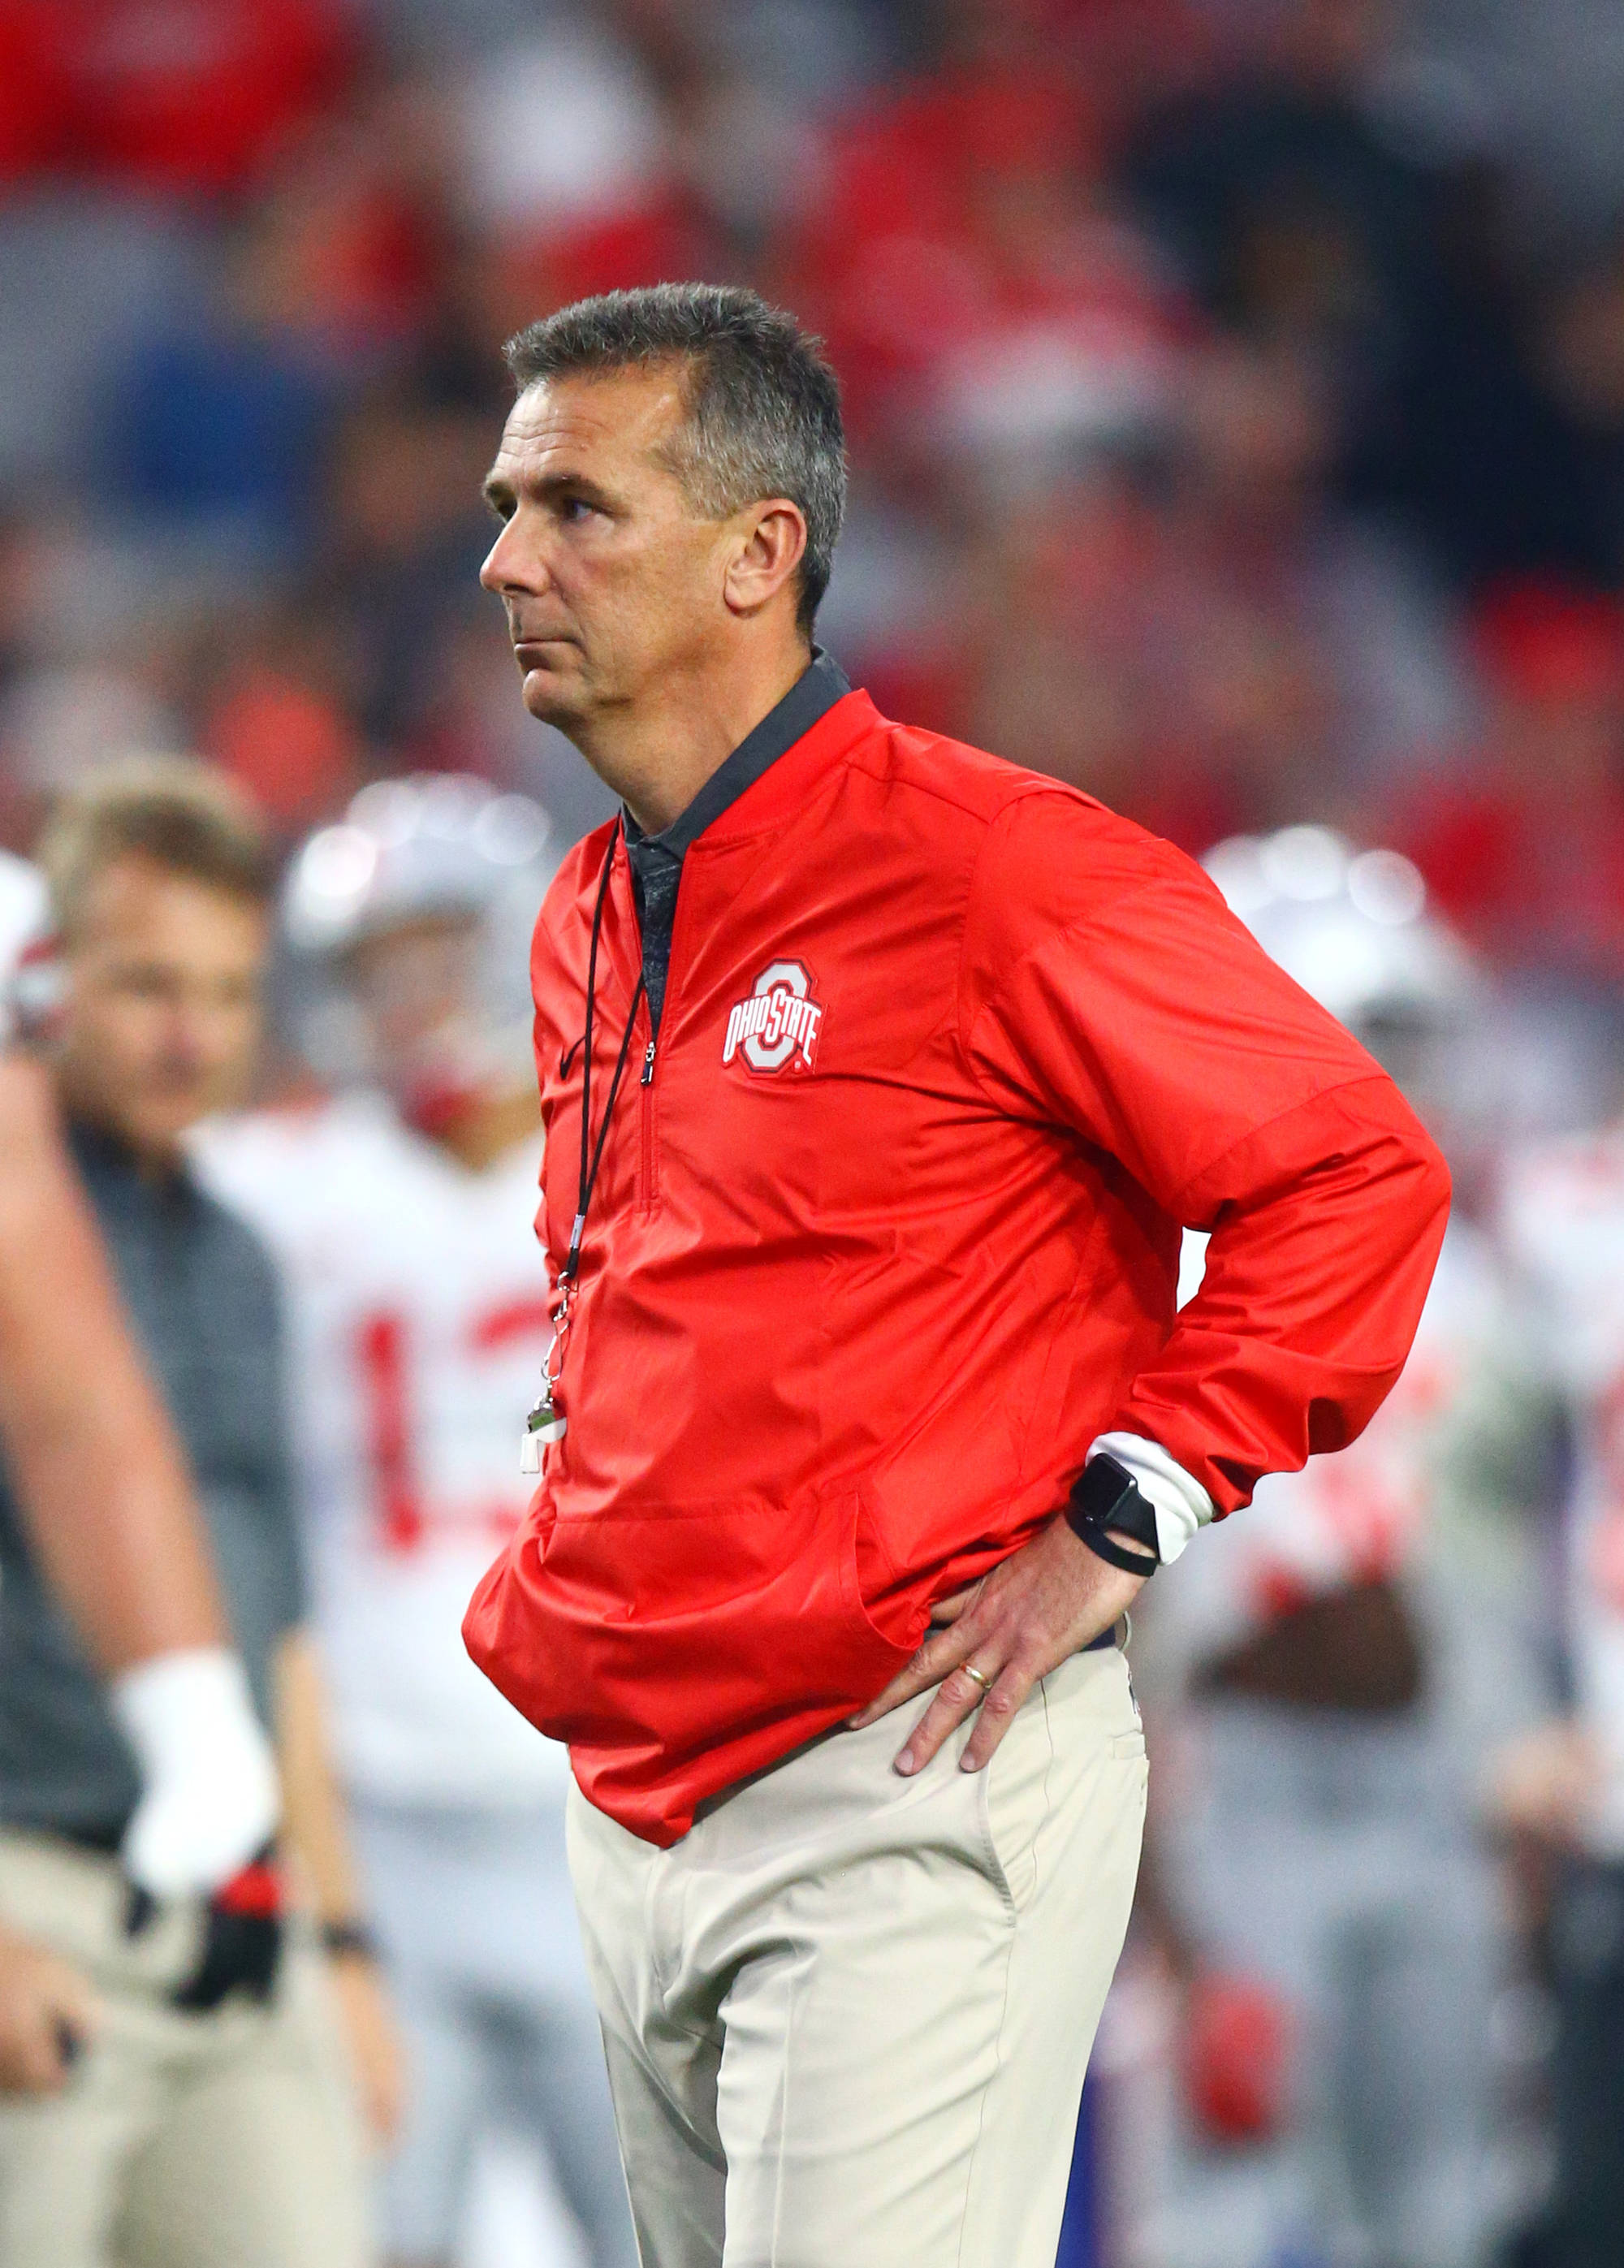 What Big Ten Football coaches could survive an epic scandal?